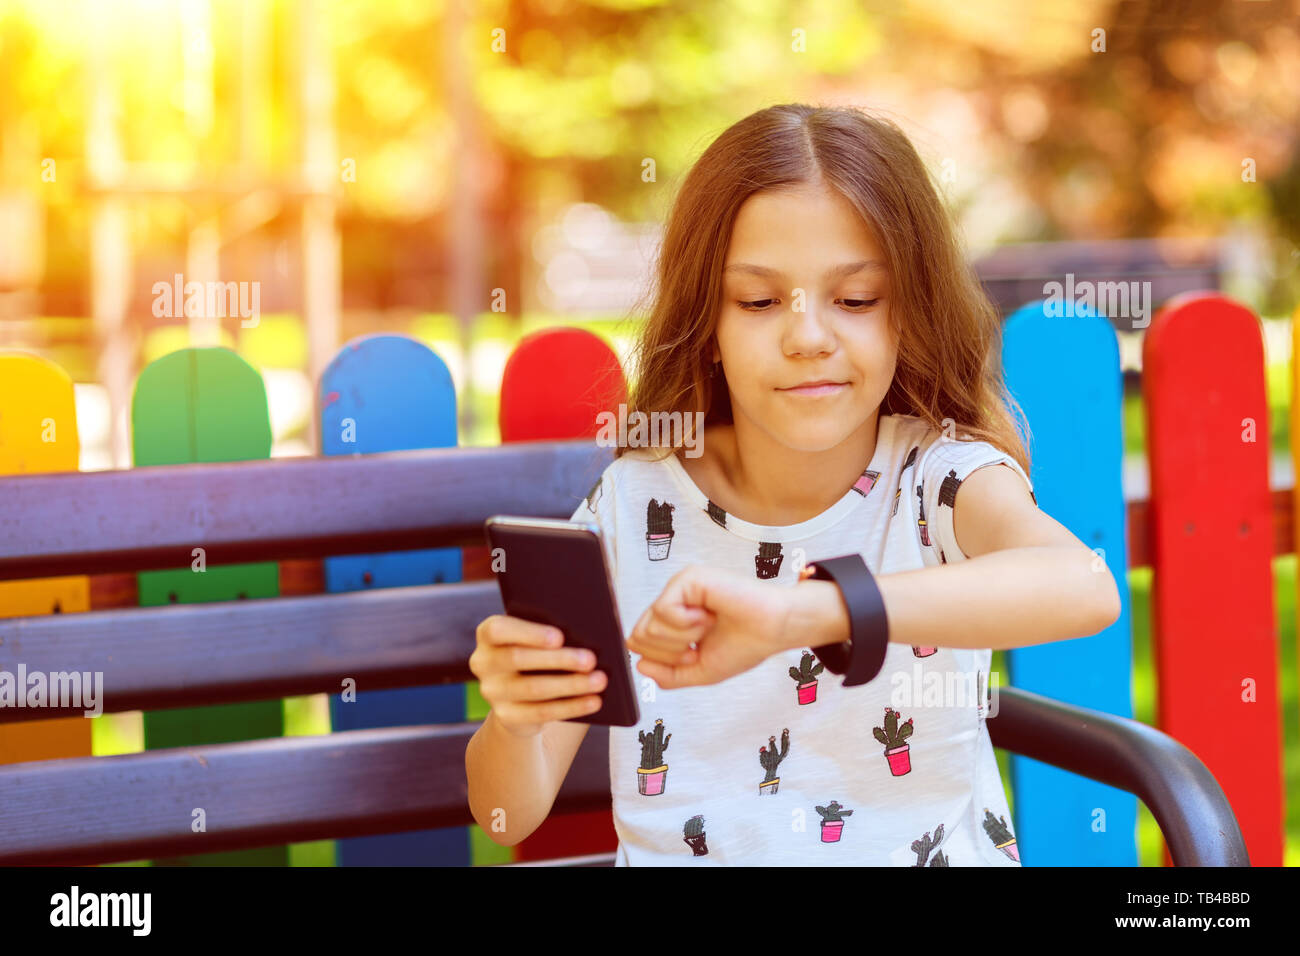 Smiling little girl using modern wearable smart watch and mobile phone outdoor synchronizing apps Stock Photo